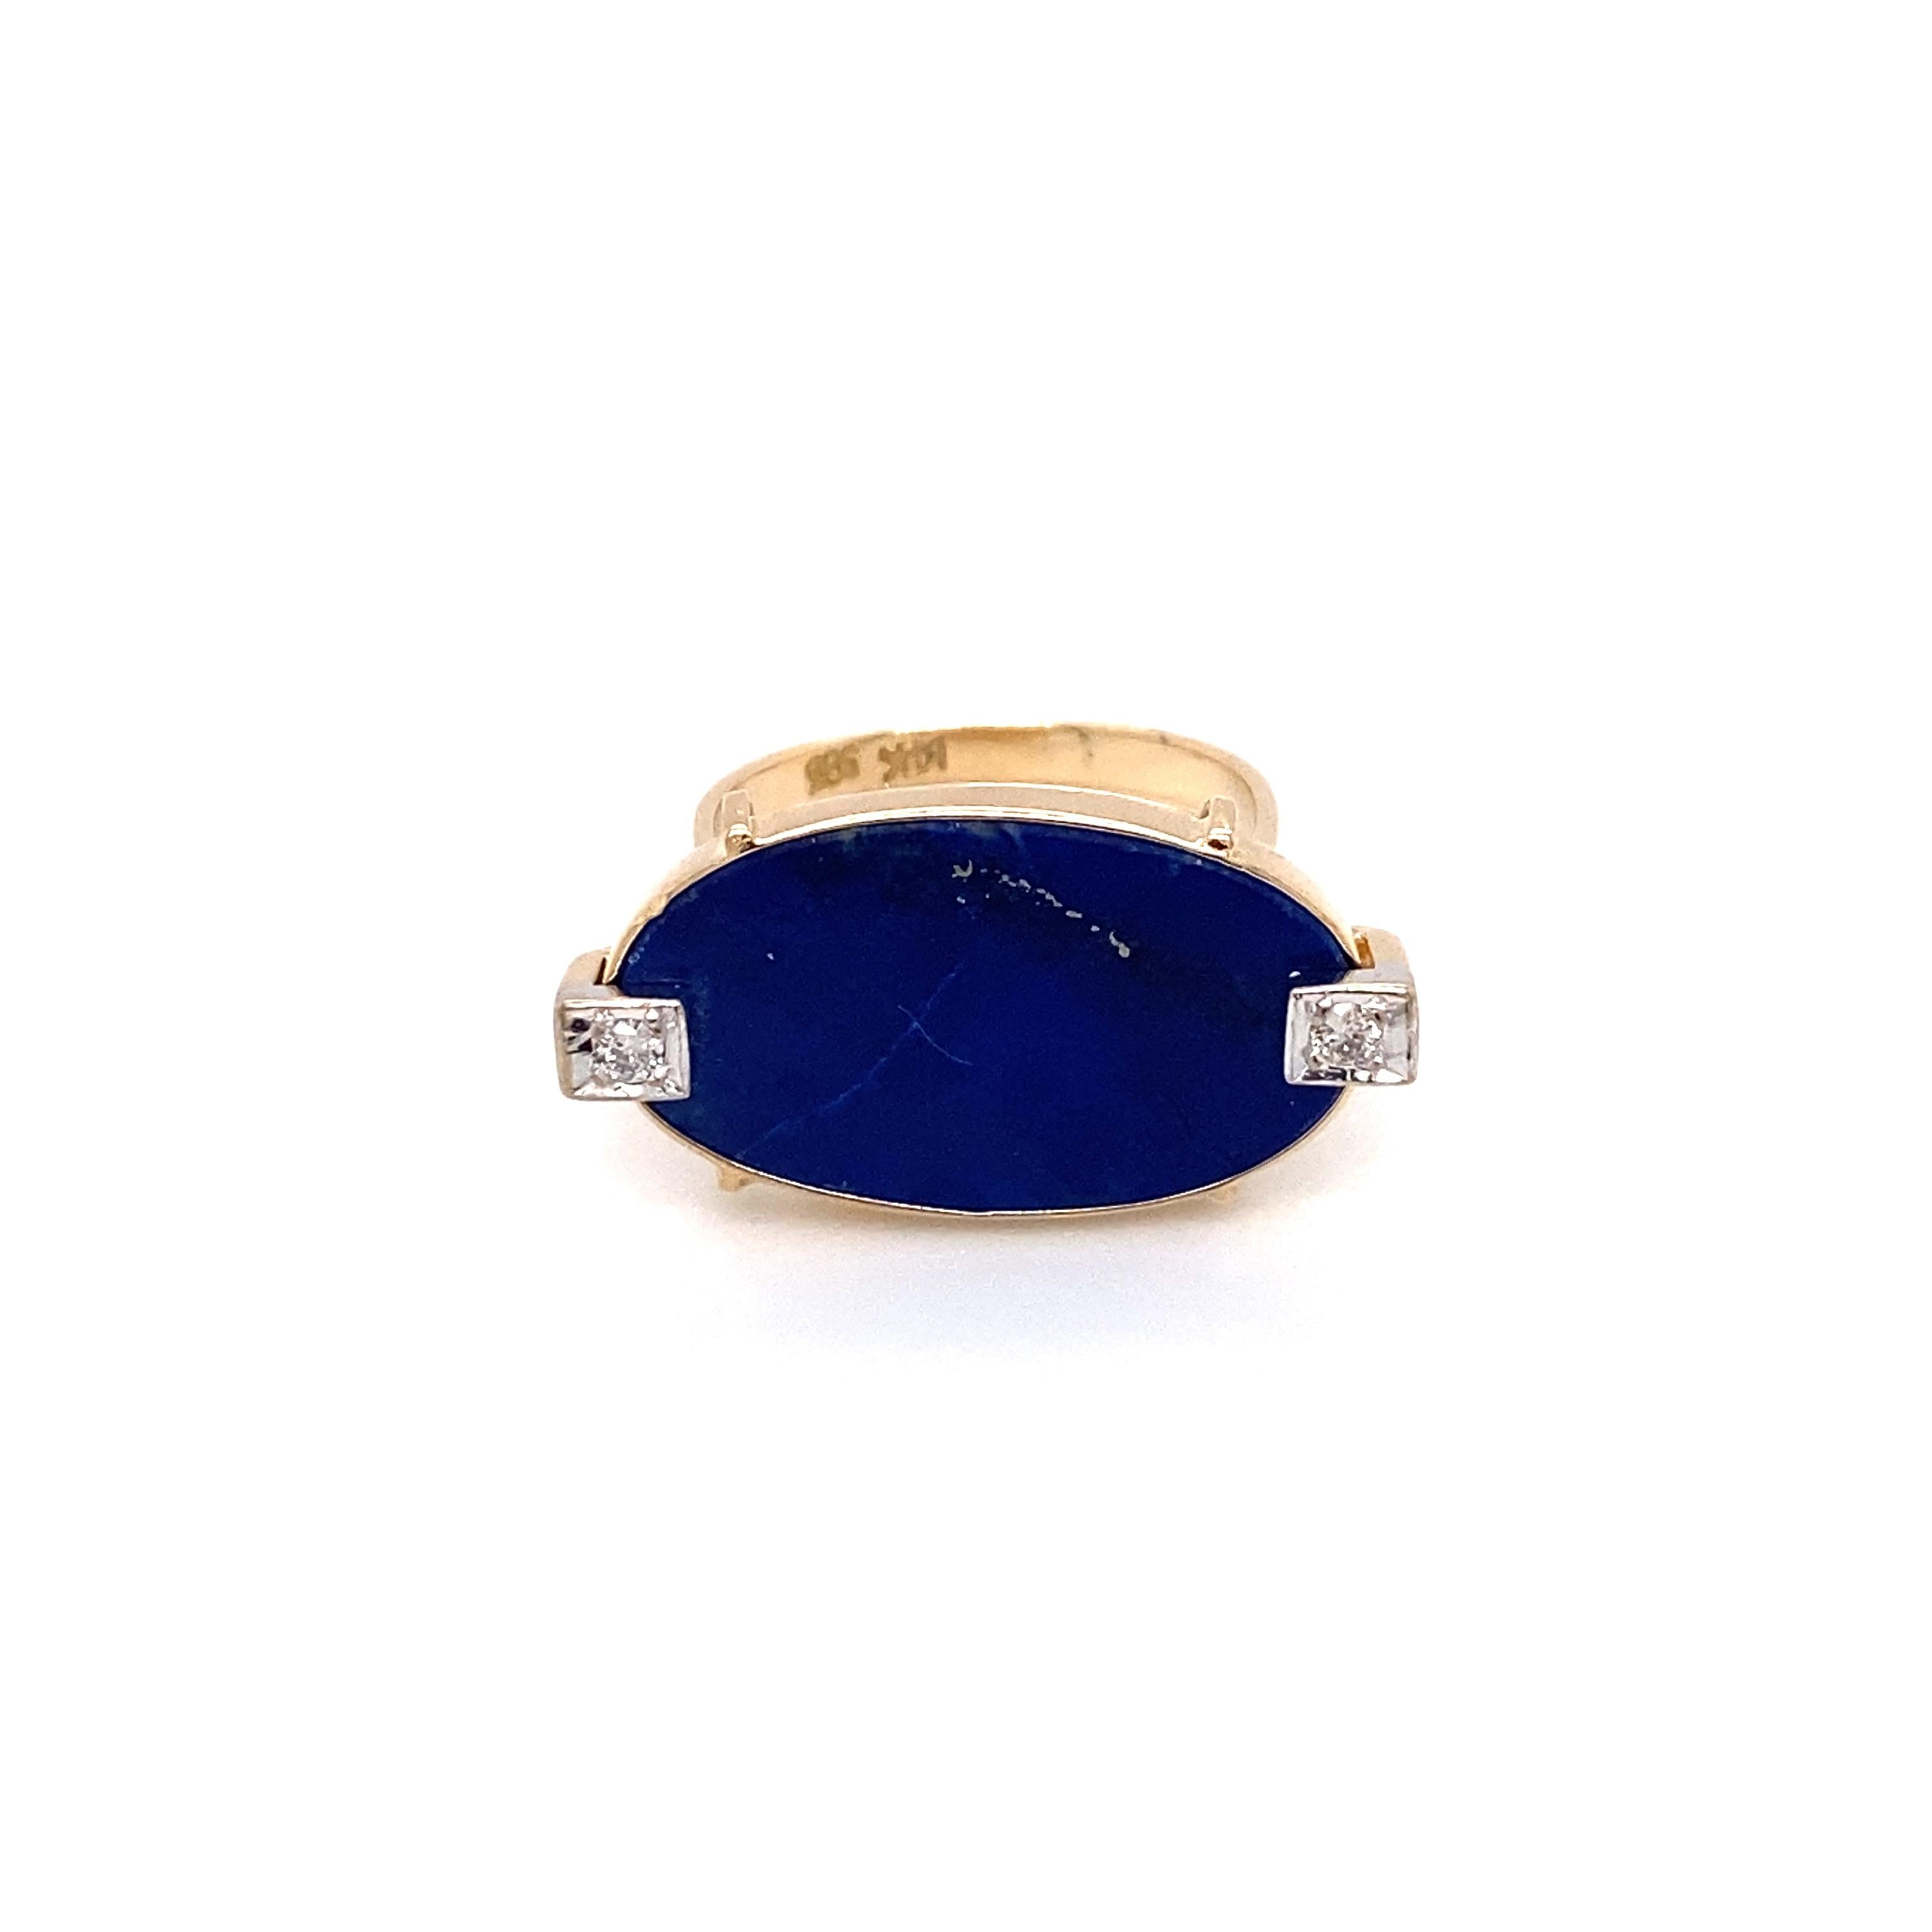 Circa: 1960s
Metal Type: 14K gold
Size: US 6.5
Weight: 6.1g

Diamond Details:

Color: I
Clarity: SI1